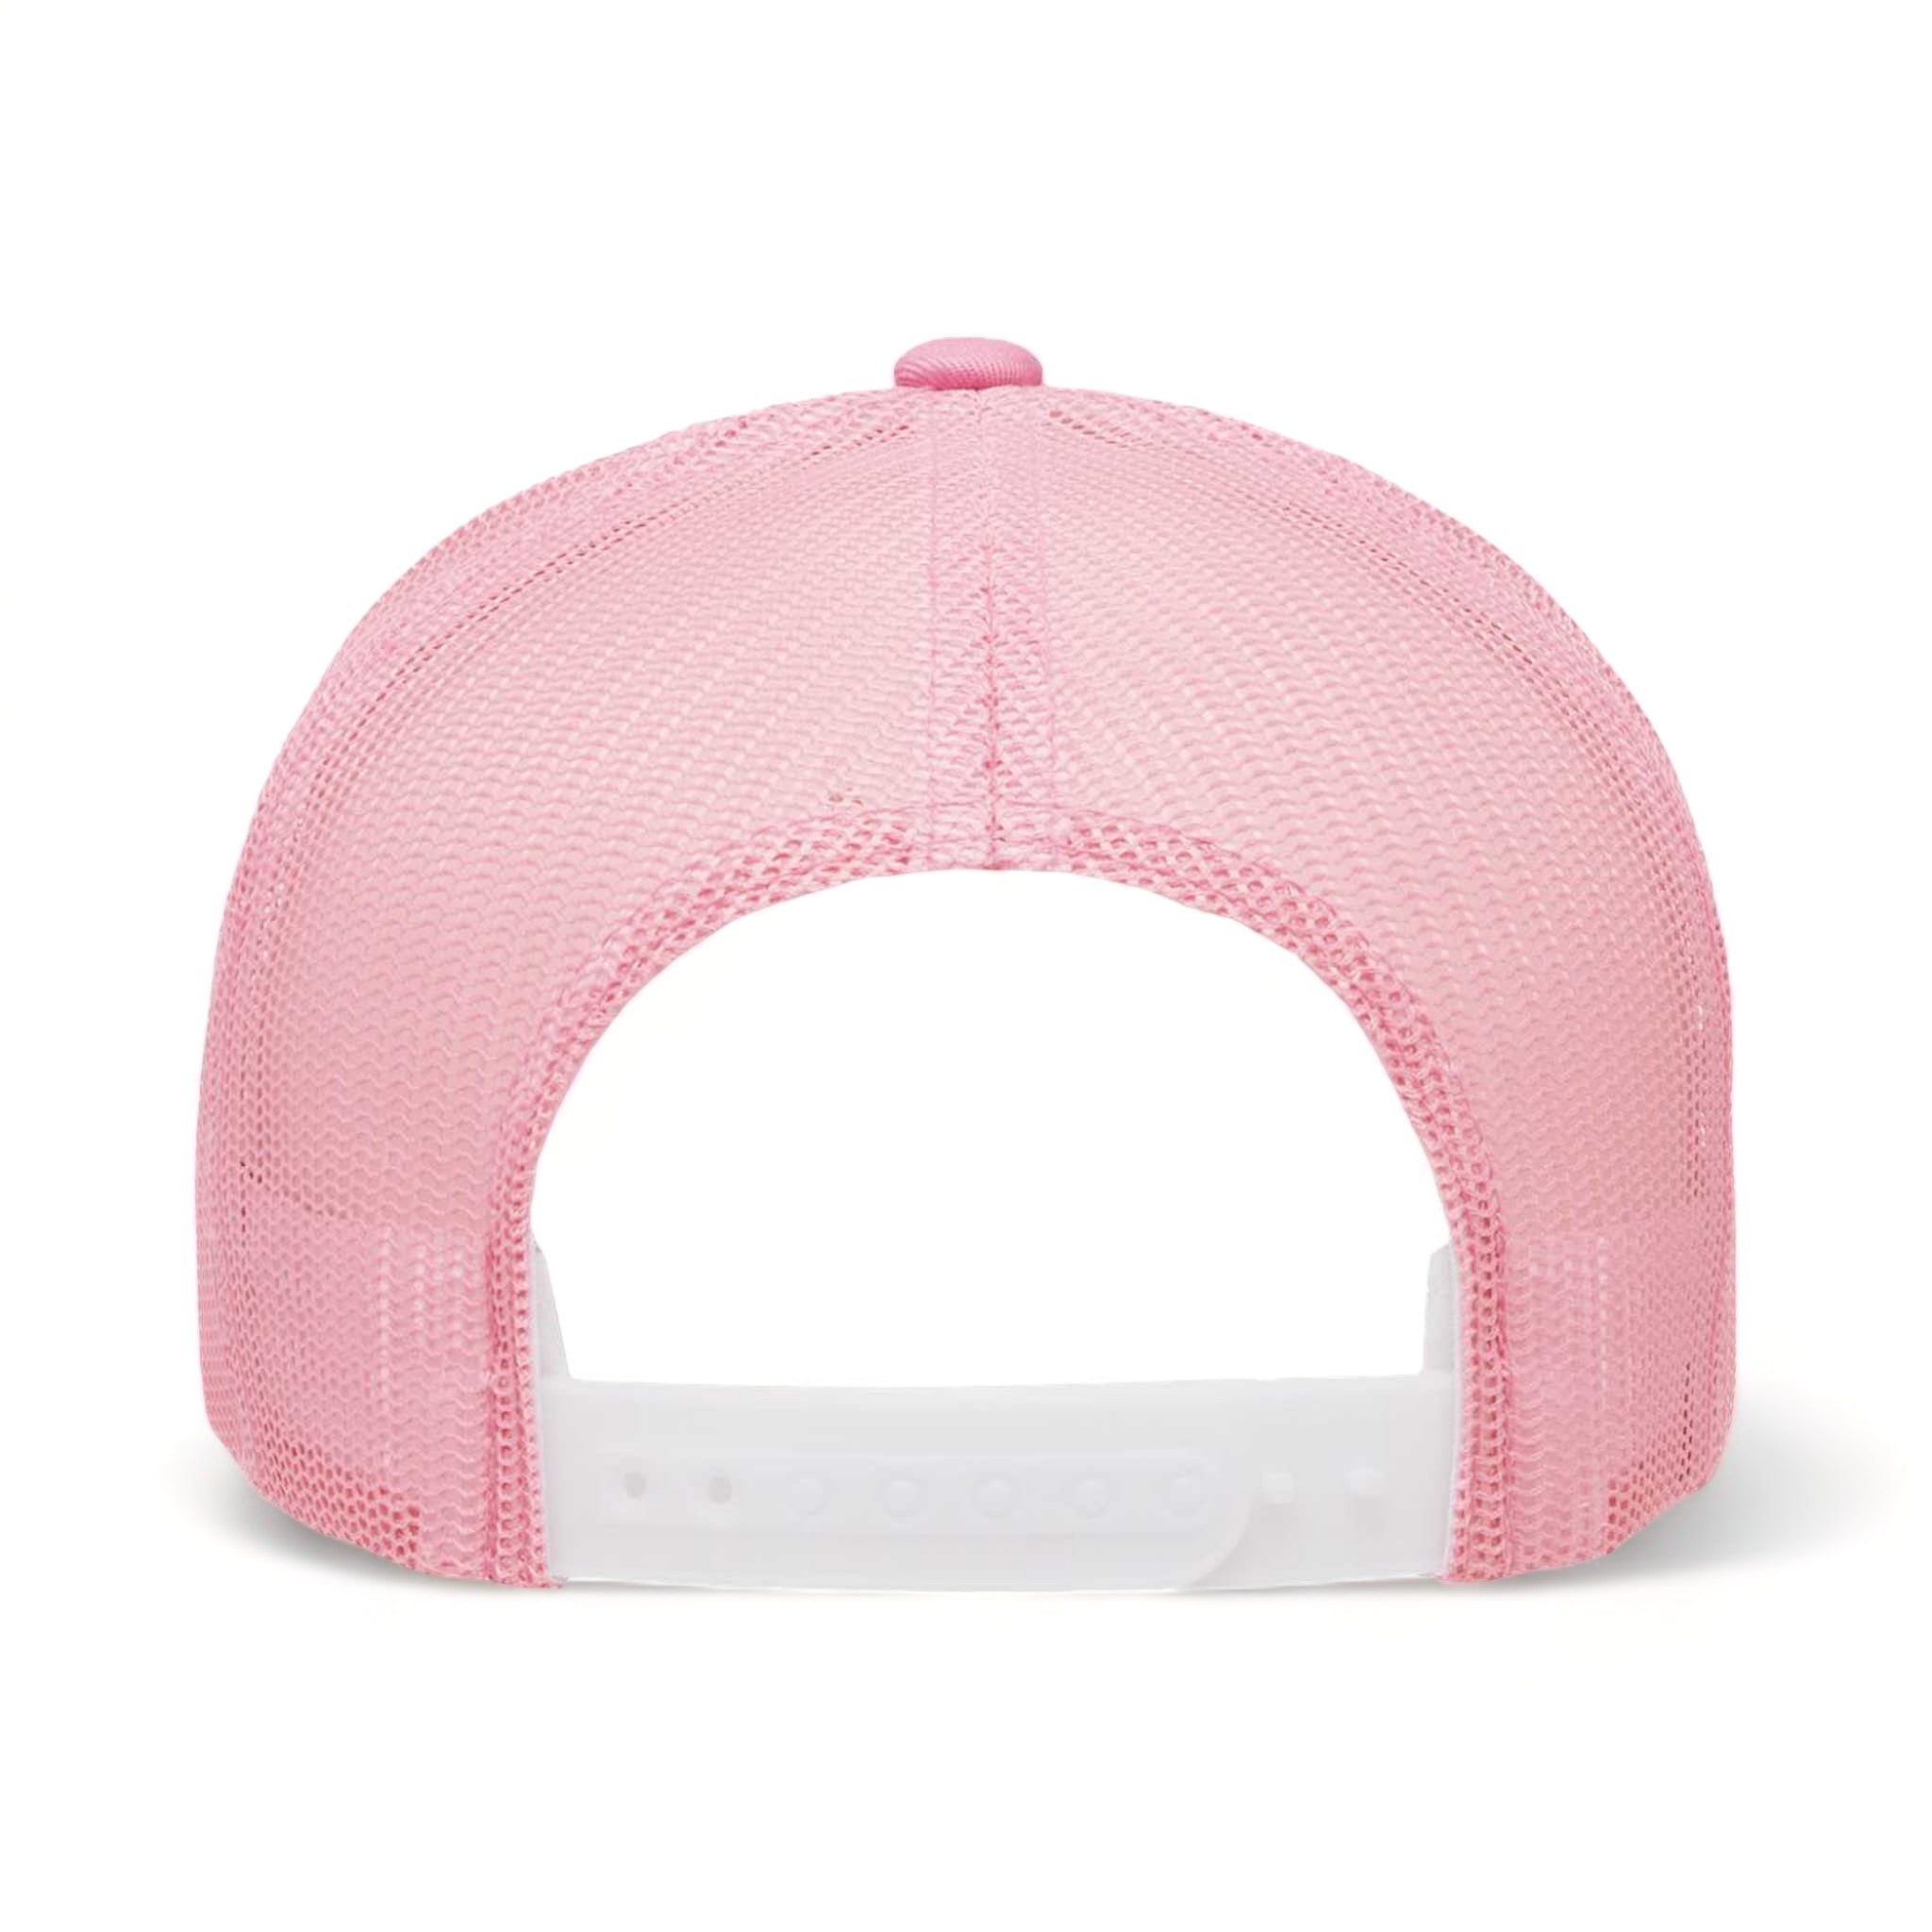 Back view of YP Classics 6606 custom hat in pink